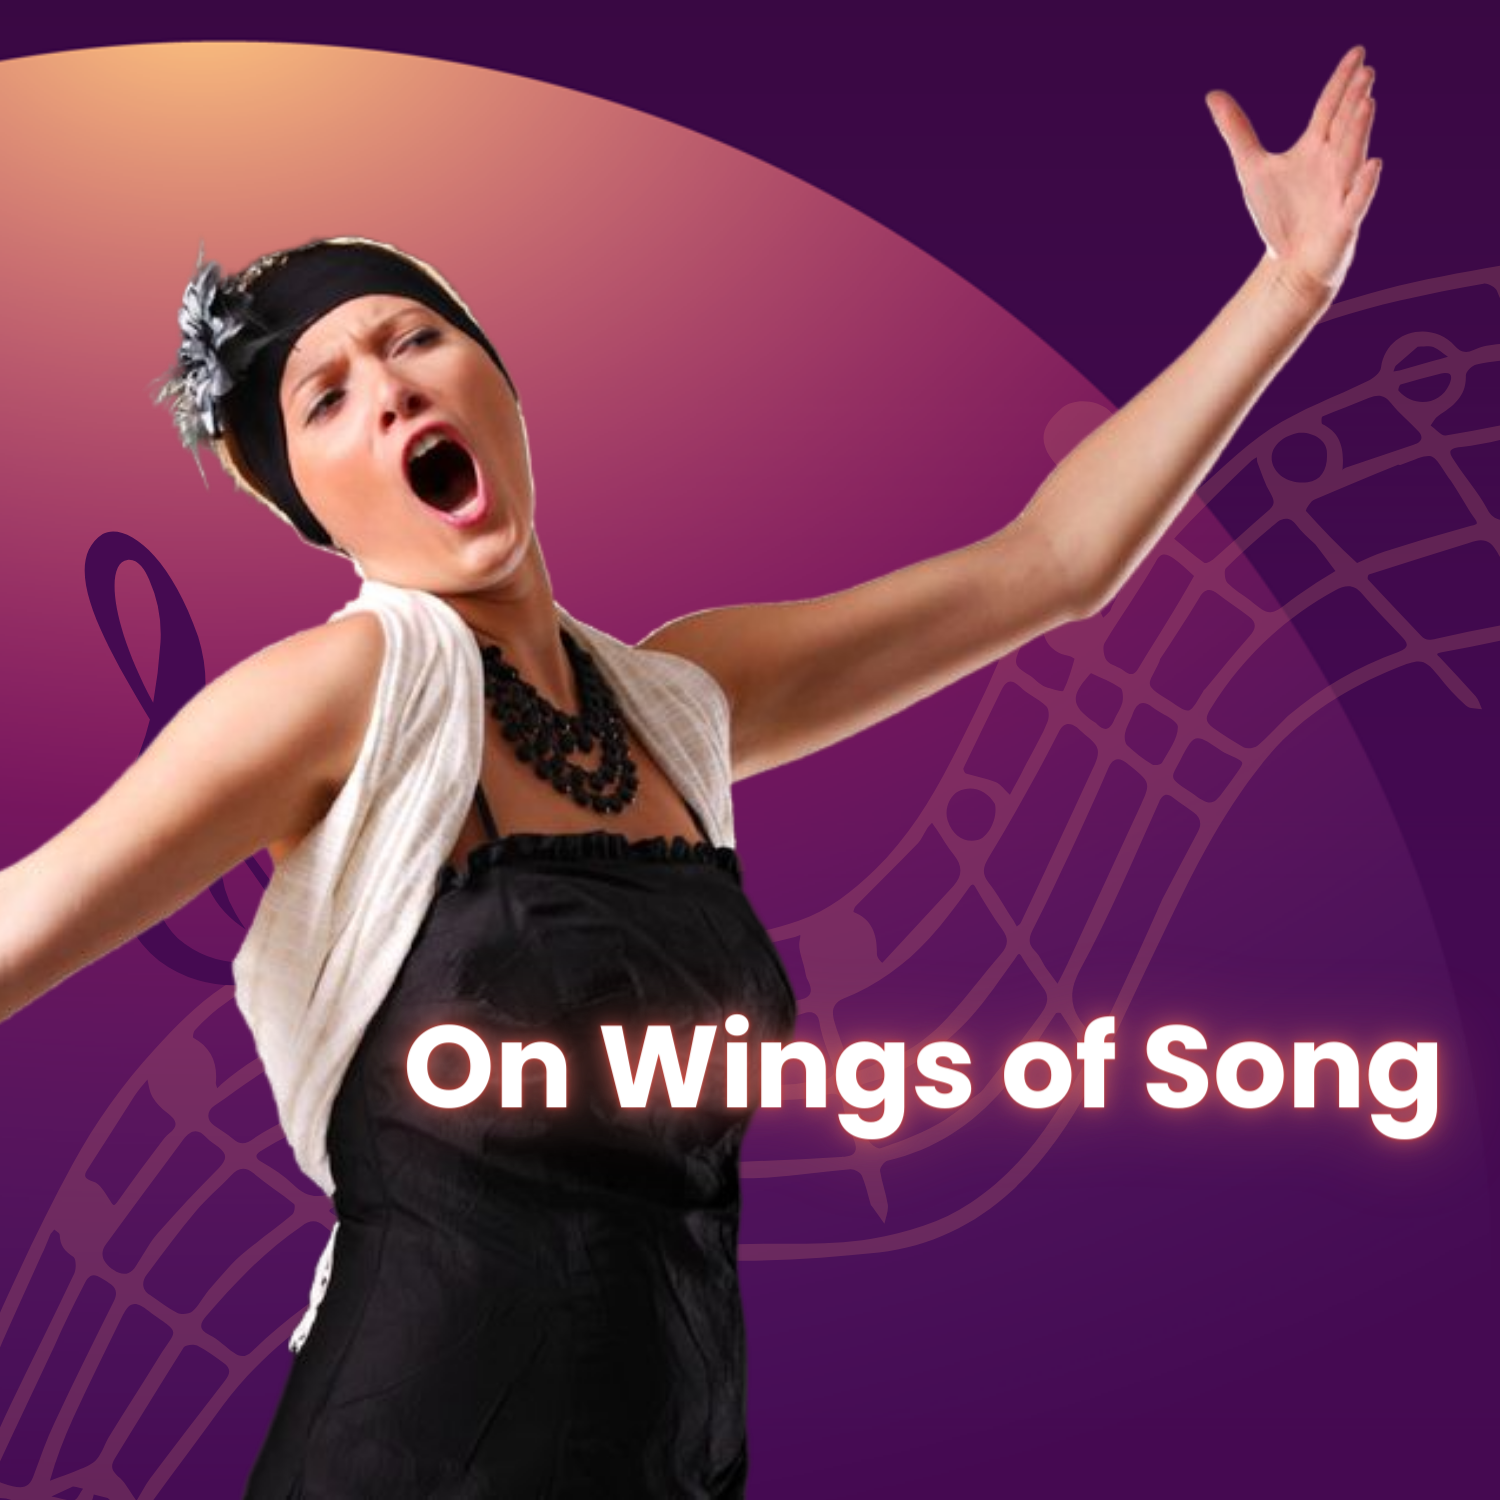 On Wings of Song - March 31